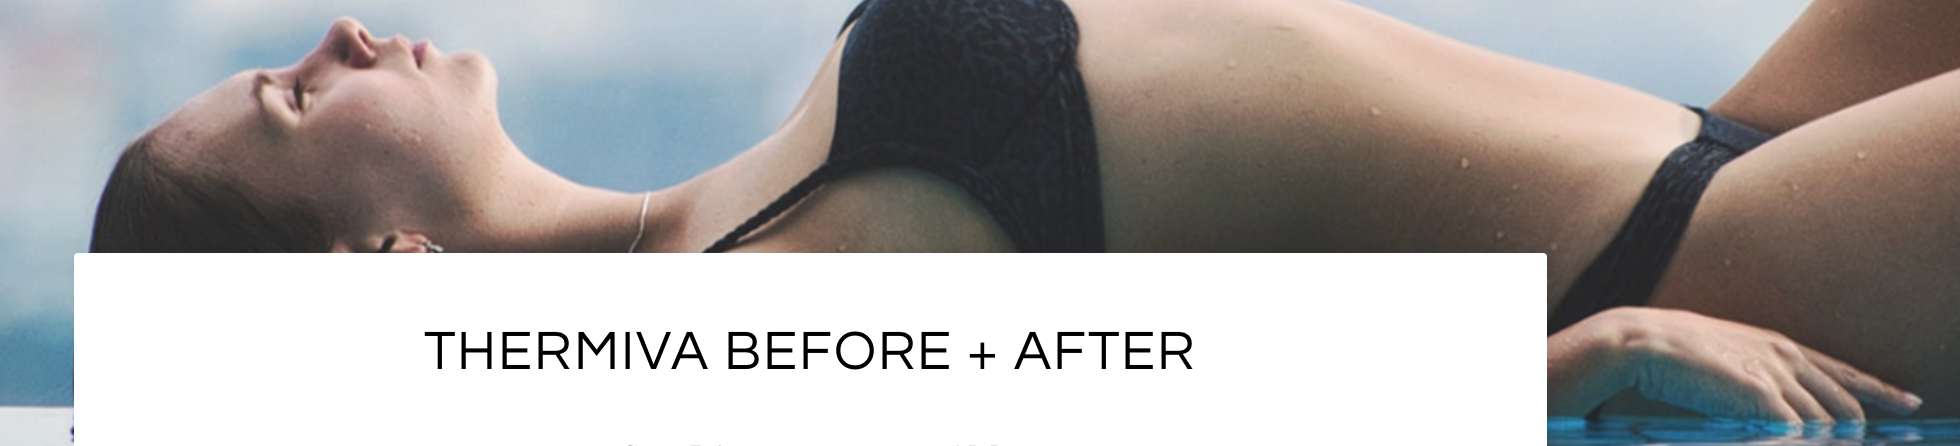 ThermiVA before and after plastic surgery Santa Monica